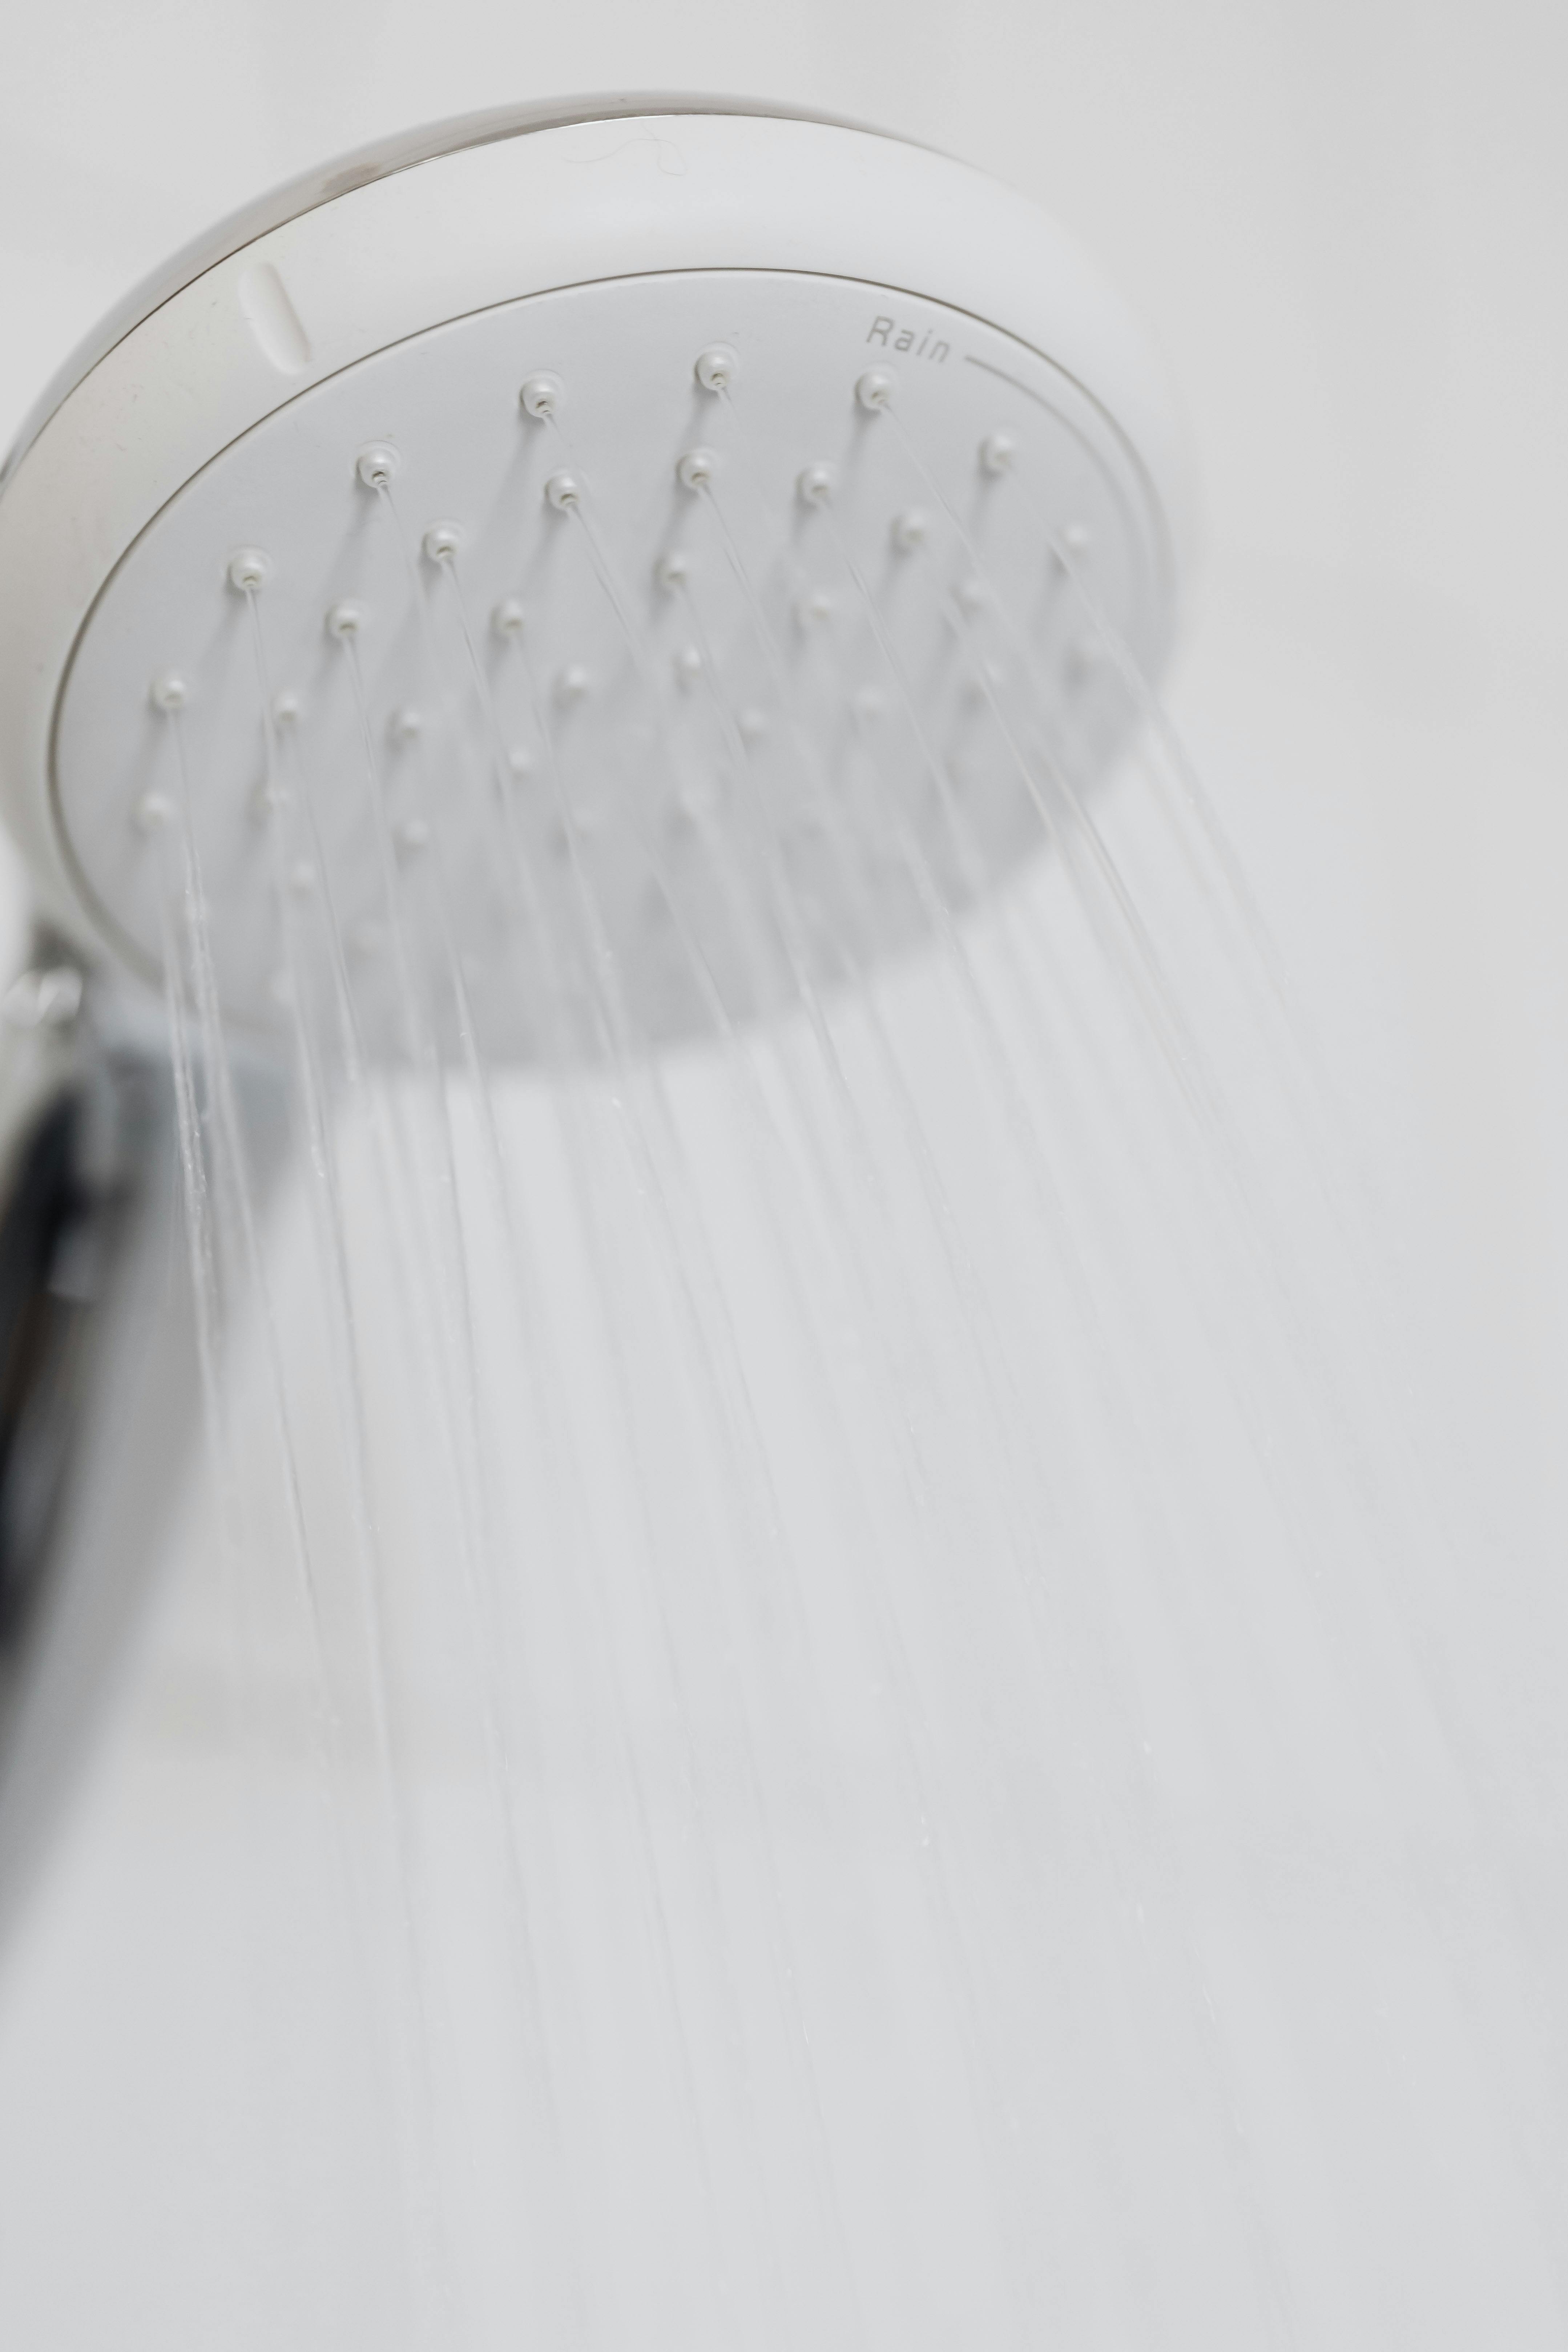 Close-up of shower head. 